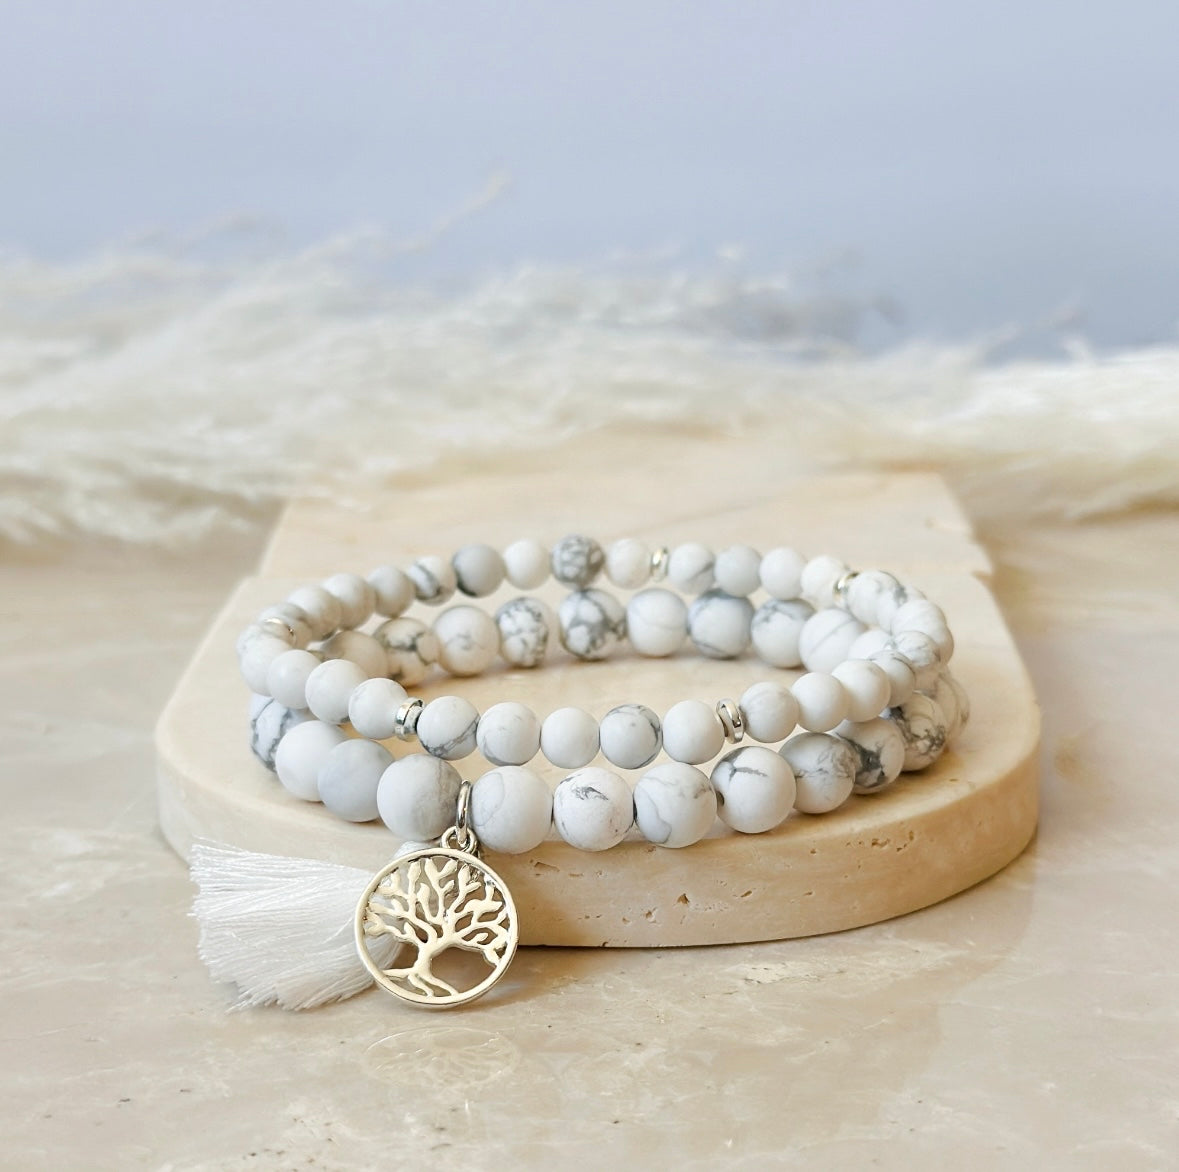 "Howlite" Gemstone Bracelet Set, meticulously crafted with Howlite, chosen for its profound healing properties. Howlite is a stone known to inspire a sense of calm, inner wisdom, and tranquility, making it an ideal companion for mindfulness and self-reflection.